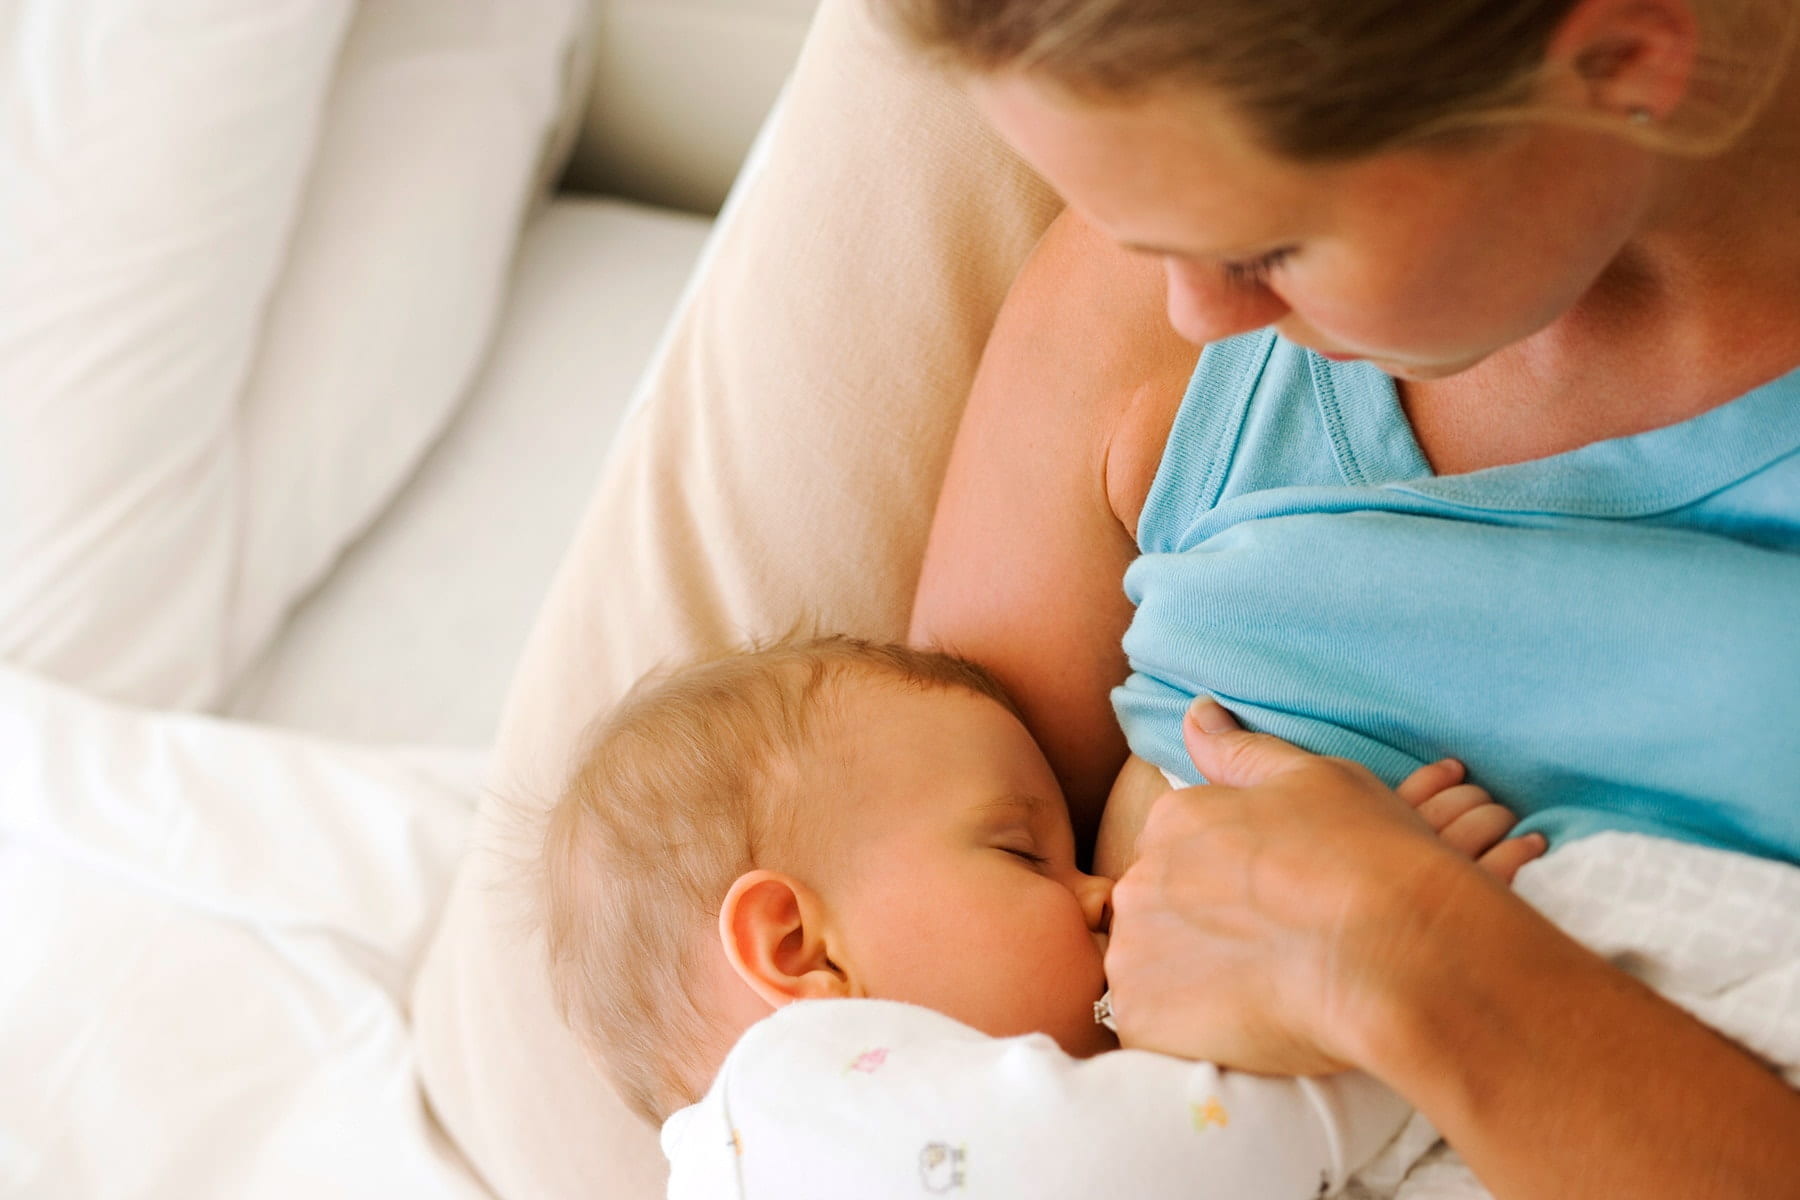 In what cases should the mother not breastfeed the baby?